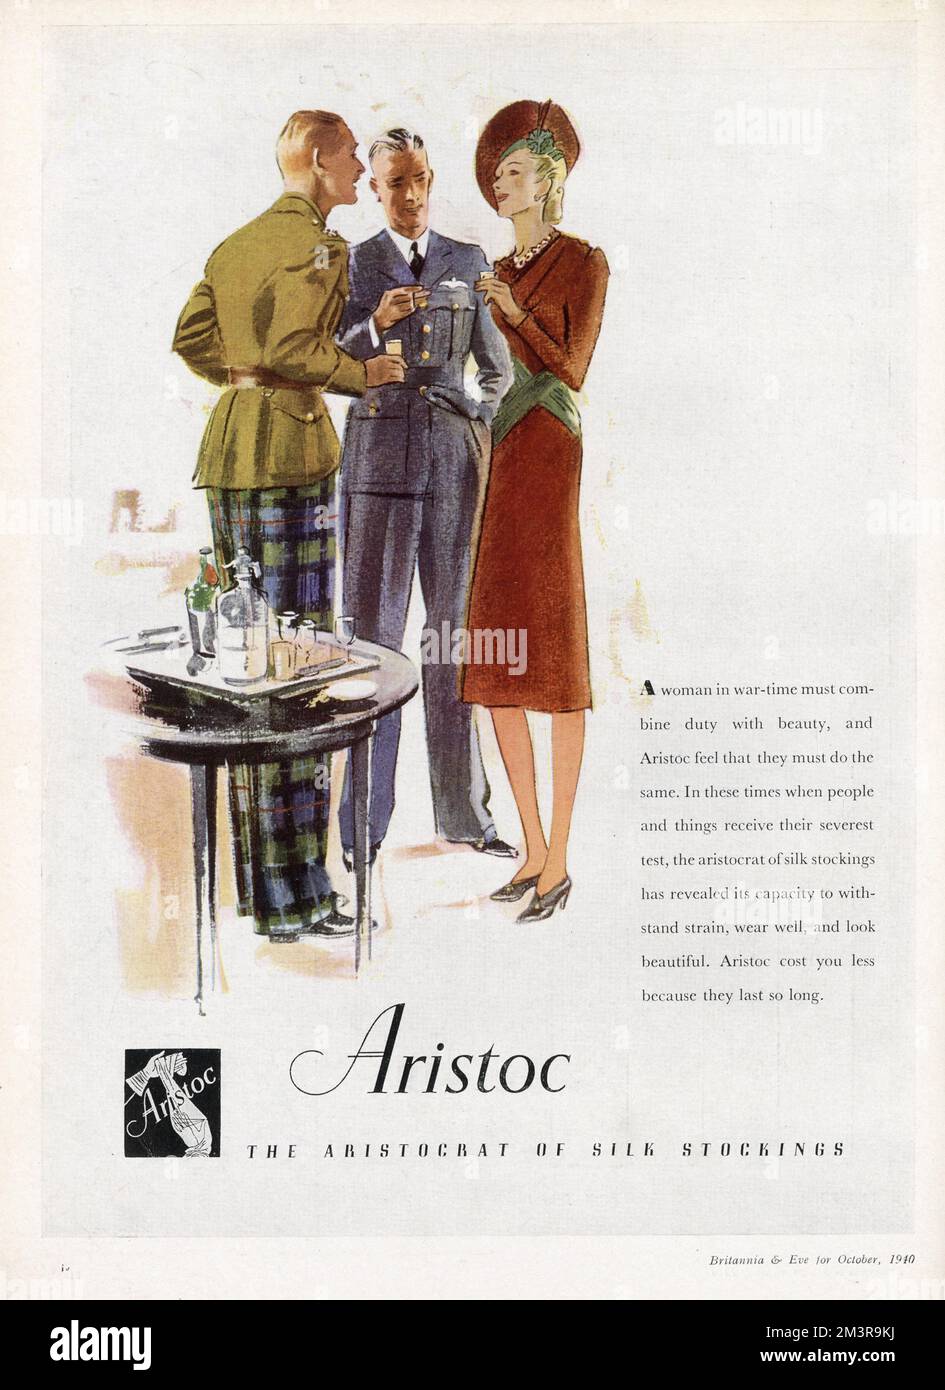 Advertisement for Aristoc silk stockings. An elegant woman talking and enjoying a drink with two officers. The advertisement reads: 'A woman in war-time must combine duty with beauty, and Aristoc feel that they must do the same. In these times when people and things receive their severest test, the aristocrat of silk stockings has revealed its capacity to withstand strain, wear well, and look beautiful. Aristoc cost you less because they last so long.' Stock Photo